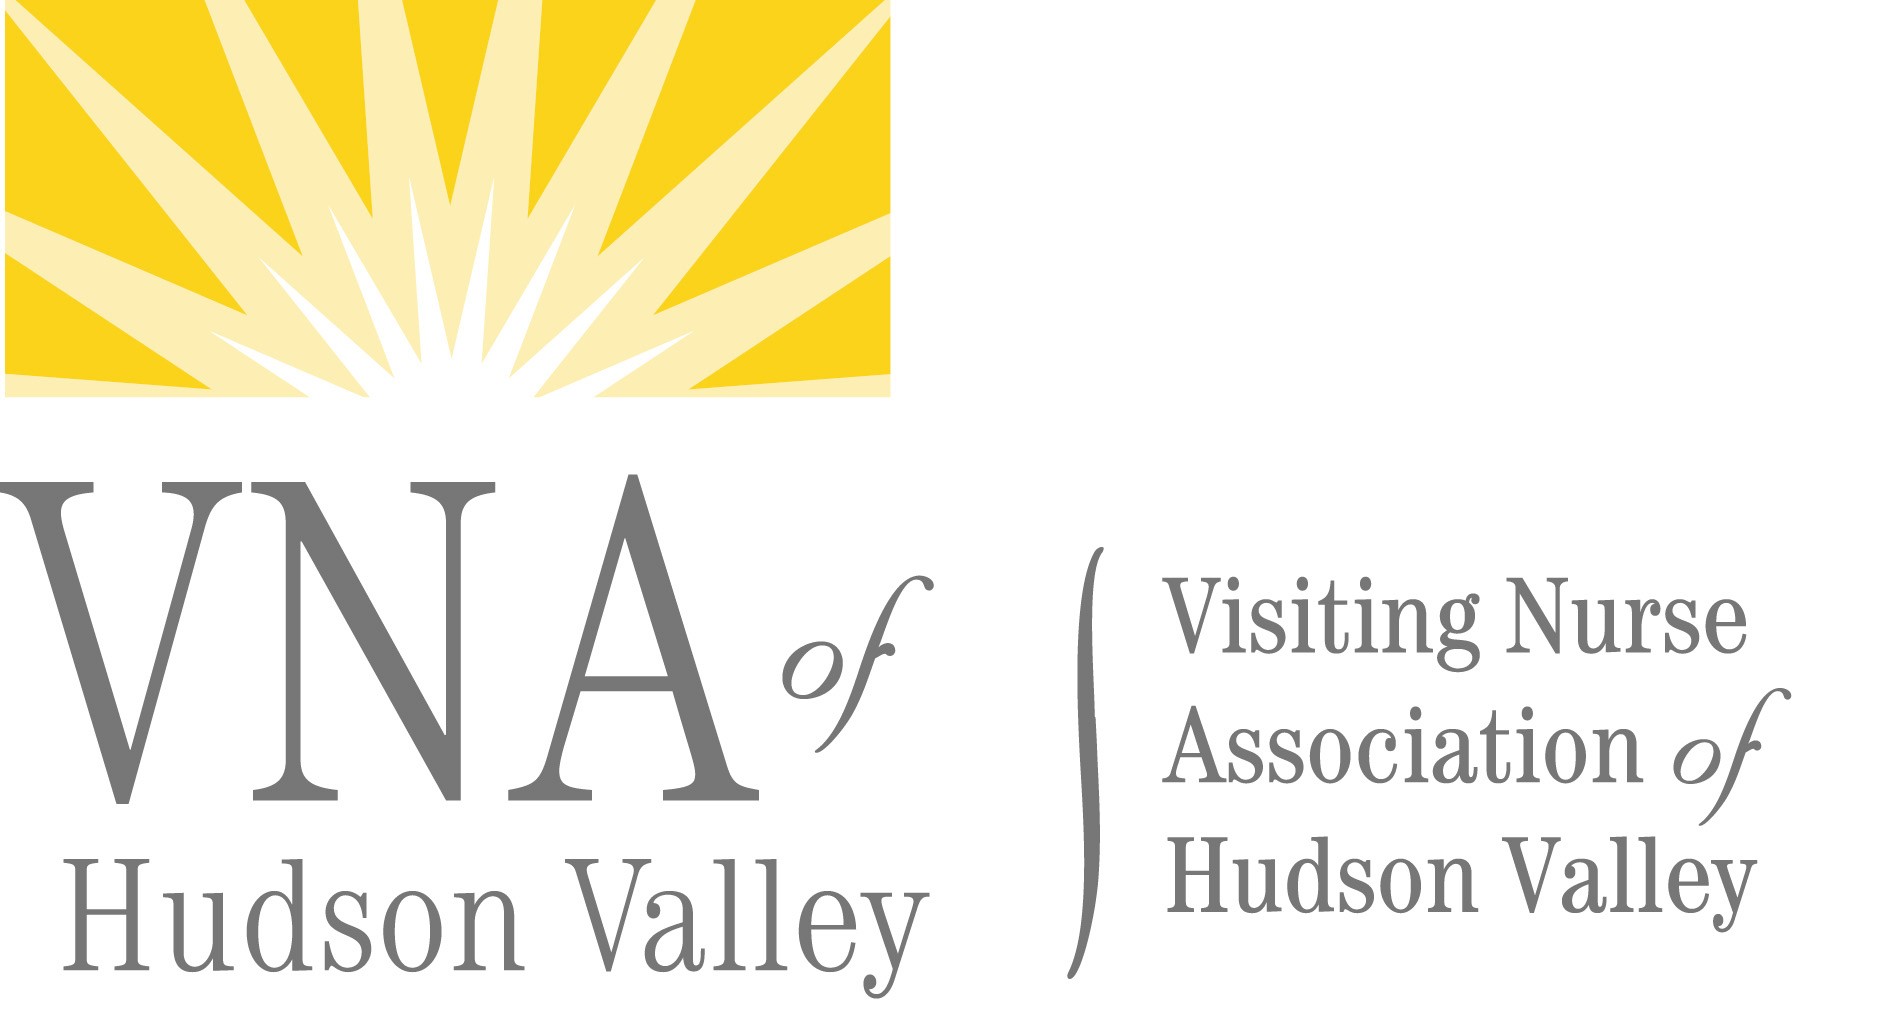 American Telecare Ati Provides Telehealth Technology And Program Support Services To The Visiting Nurse Association Vna Of Hudson Valley In New York State